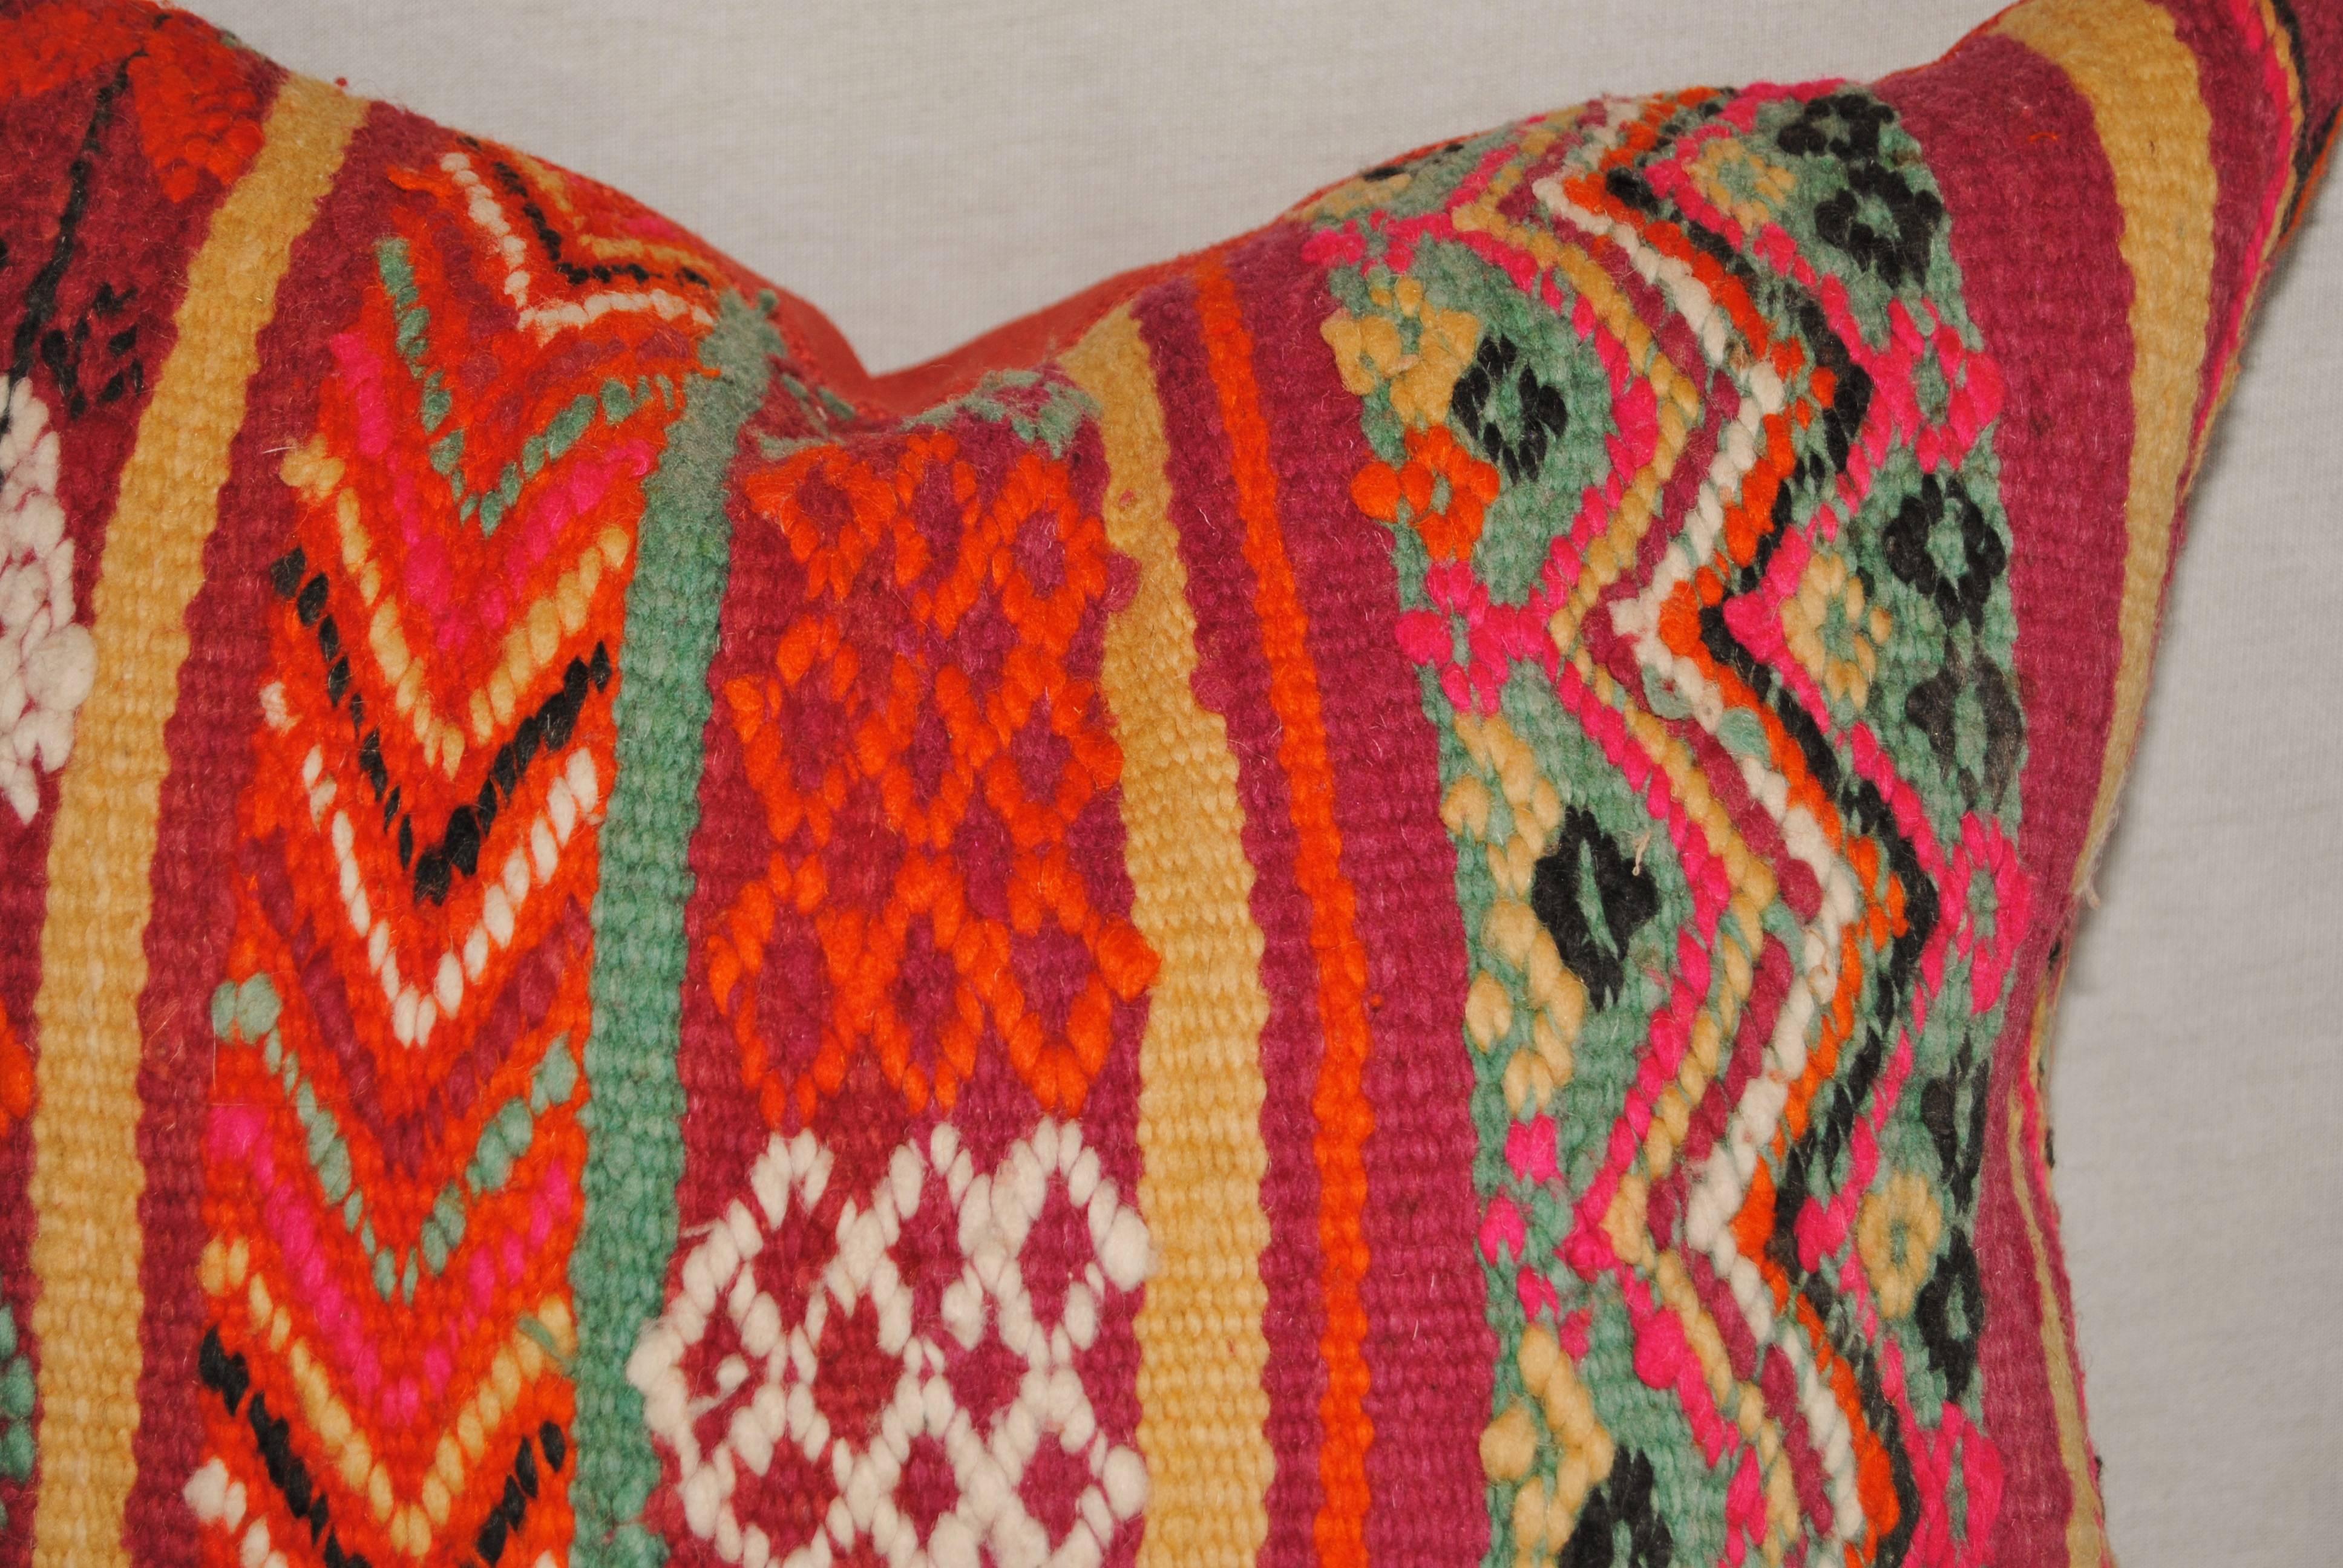 Custom pillow cut from a vintage hand loomed wool Moroccan Berber rug from the Atlas Mountains. Soft lustrous wool with wonderful tribal designs in vivid colors. Pillow is backed in an orange/red linen, filled with an insert of 50/50 down and